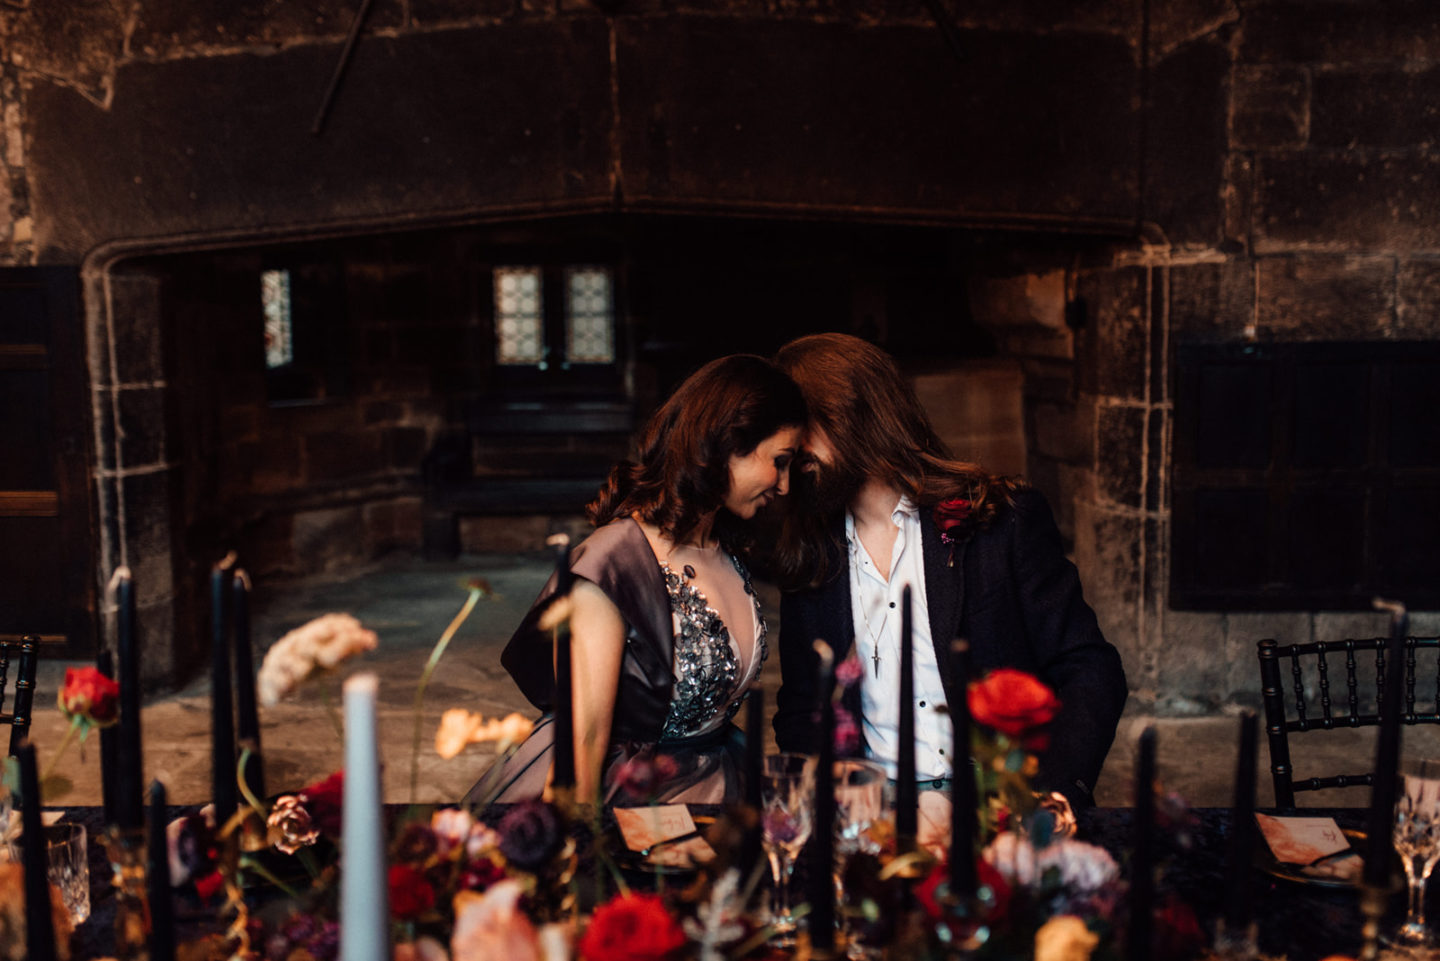 Beauty and The Beast Inspired City Wedding in Manchester